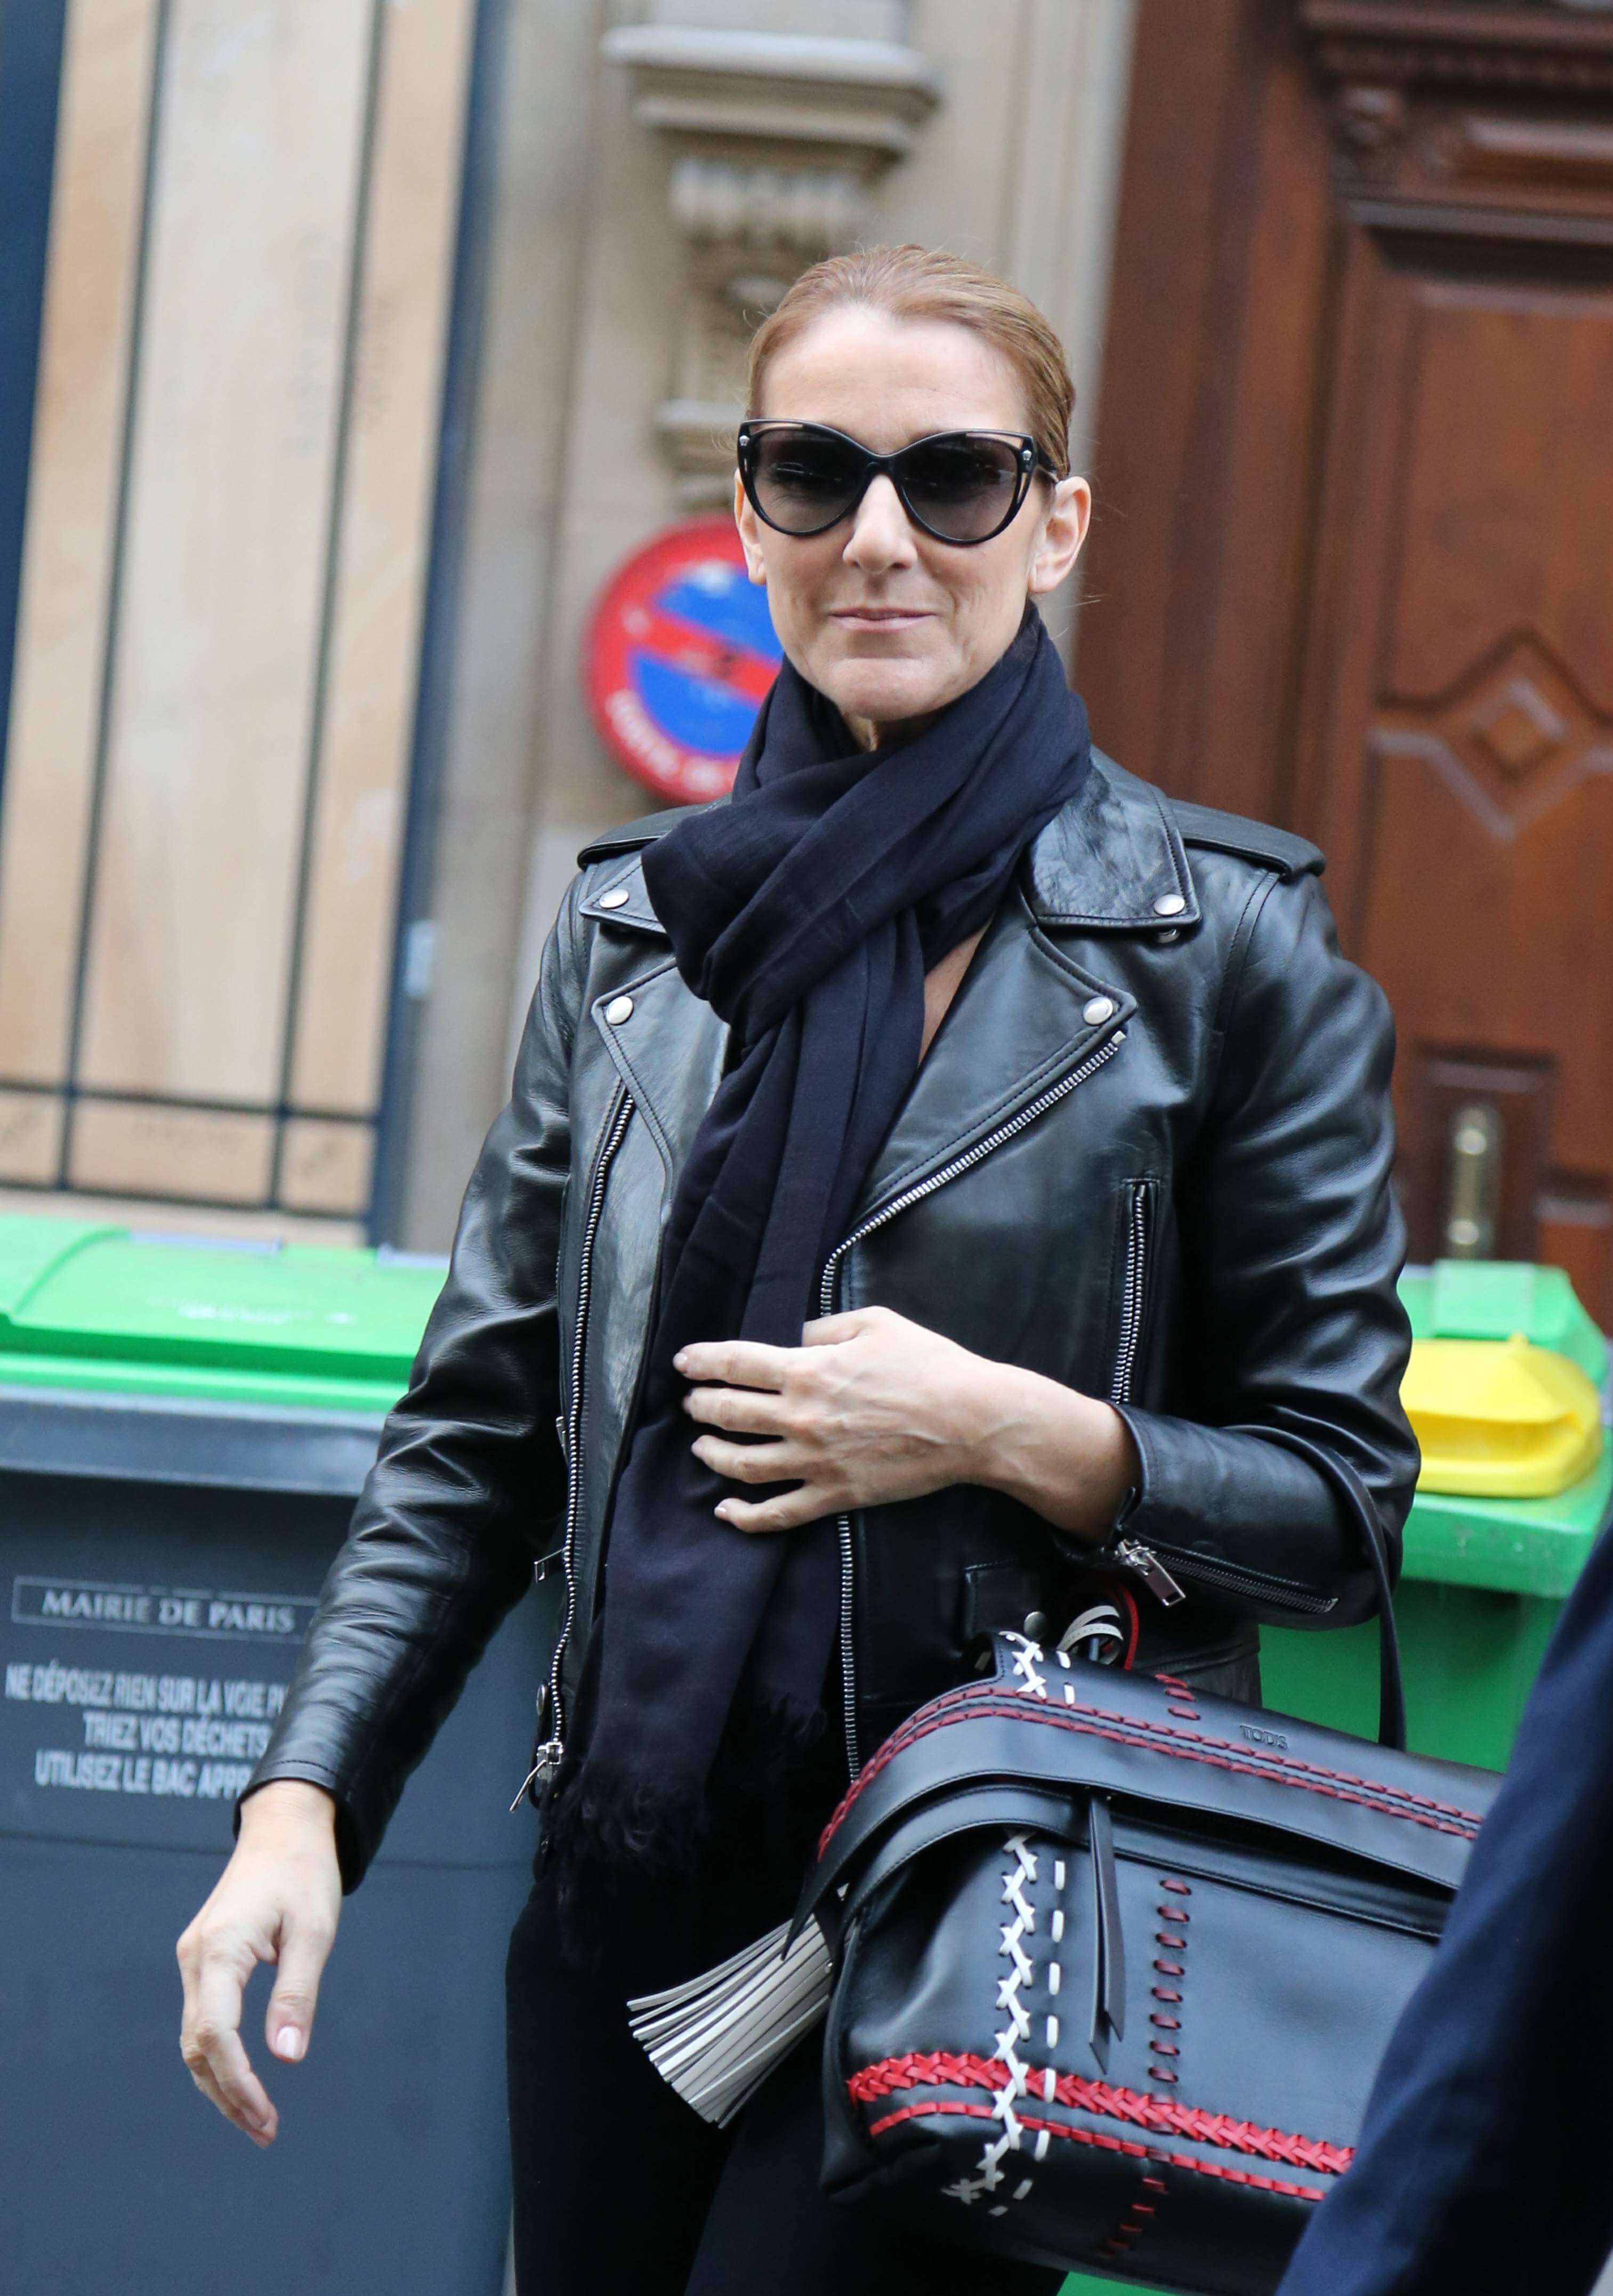 Celine Dion leaves her hotel to do a photoshoot